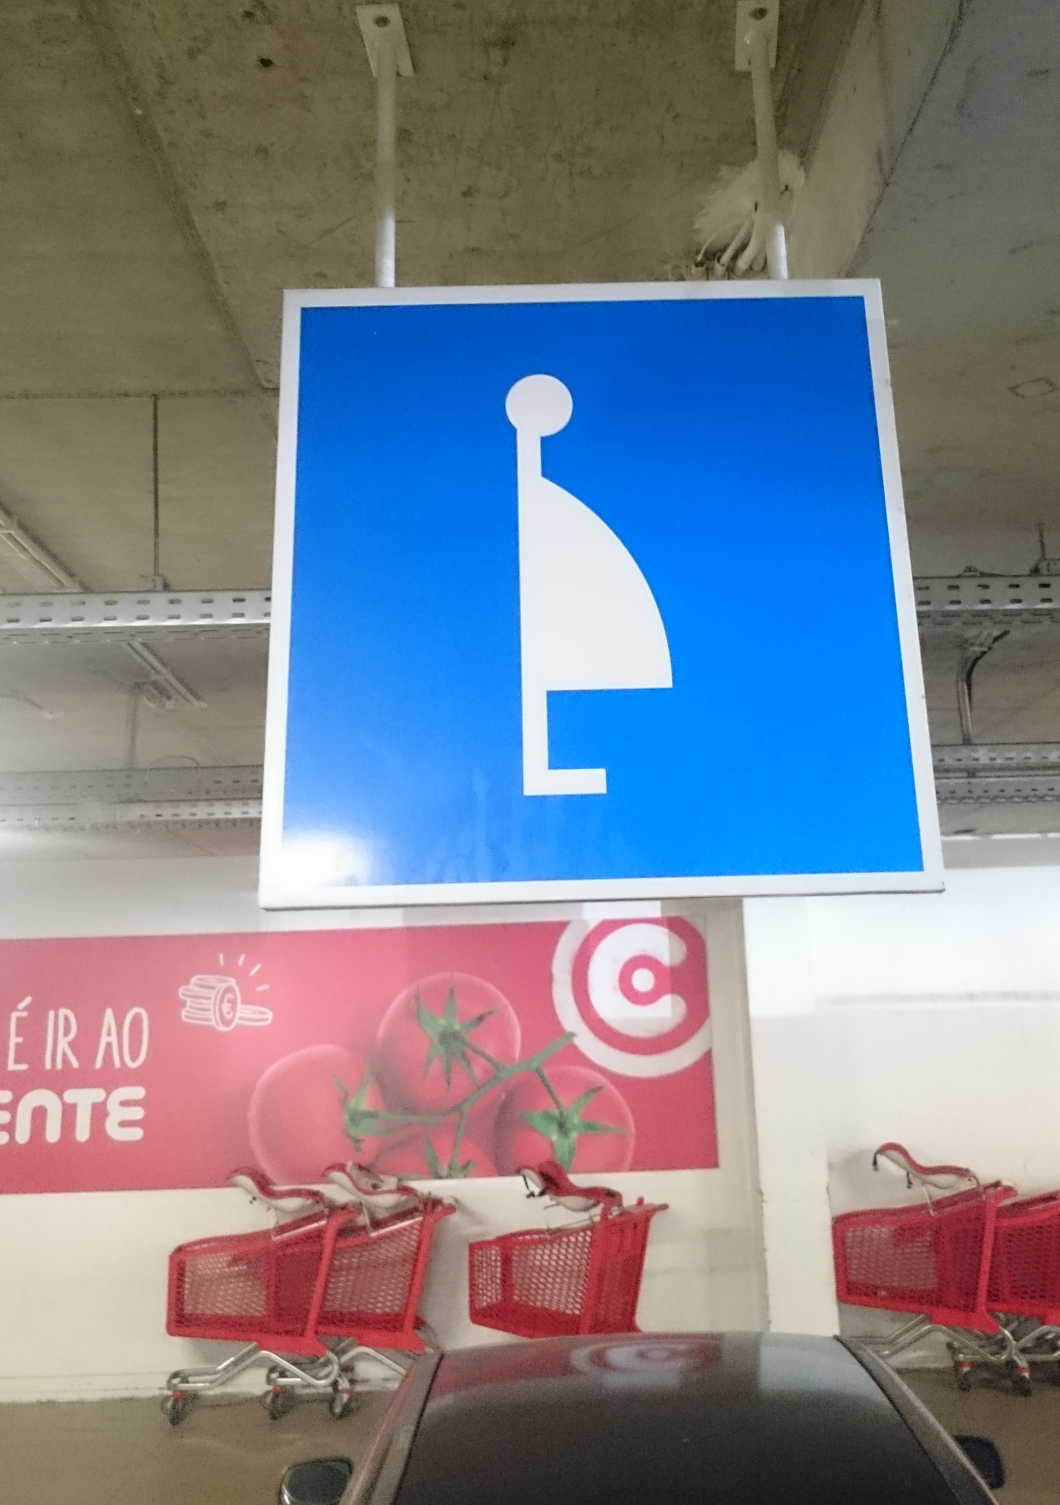 And so it happens: parking for pregnant women - My, Parking, Road sign, Pregnancy